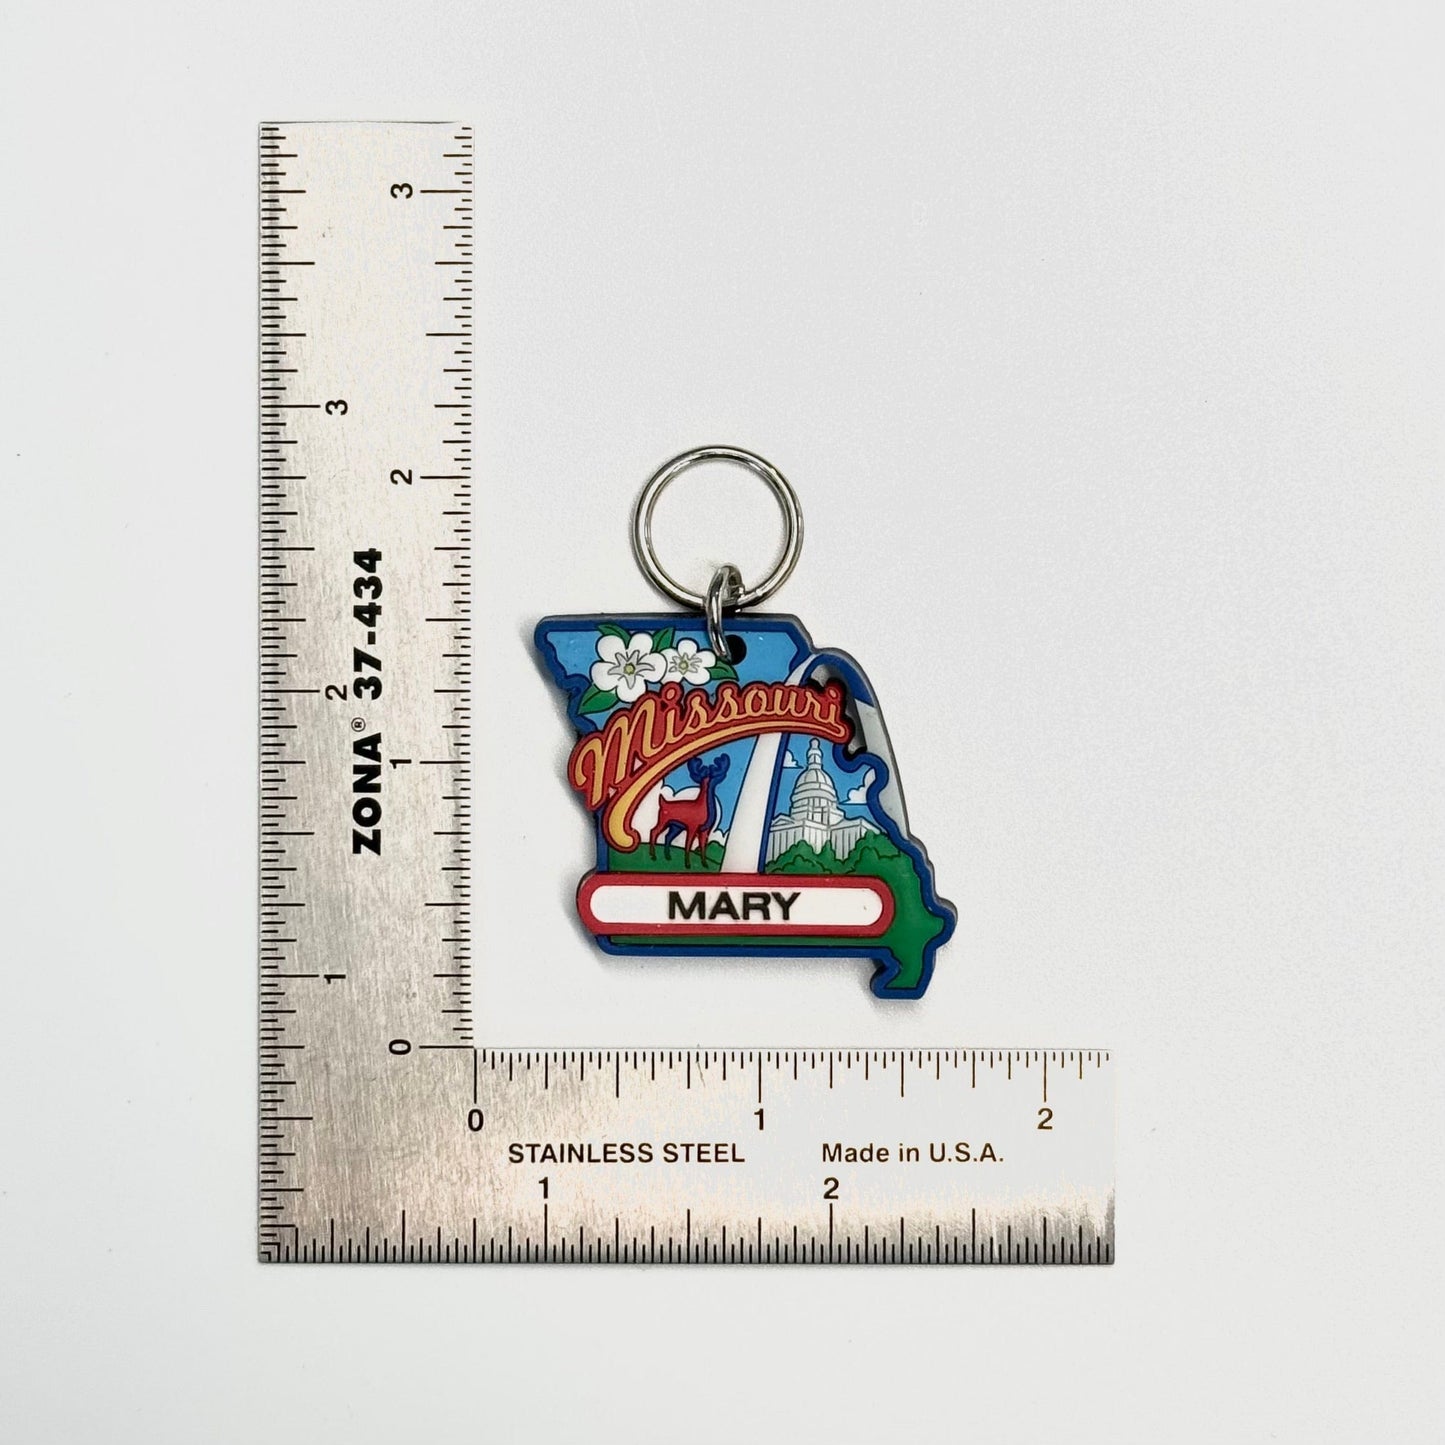 Missouri ‘Mary’ Travel Souvenir Keychain Key Ring Square Clear Soft-Touch Rubber